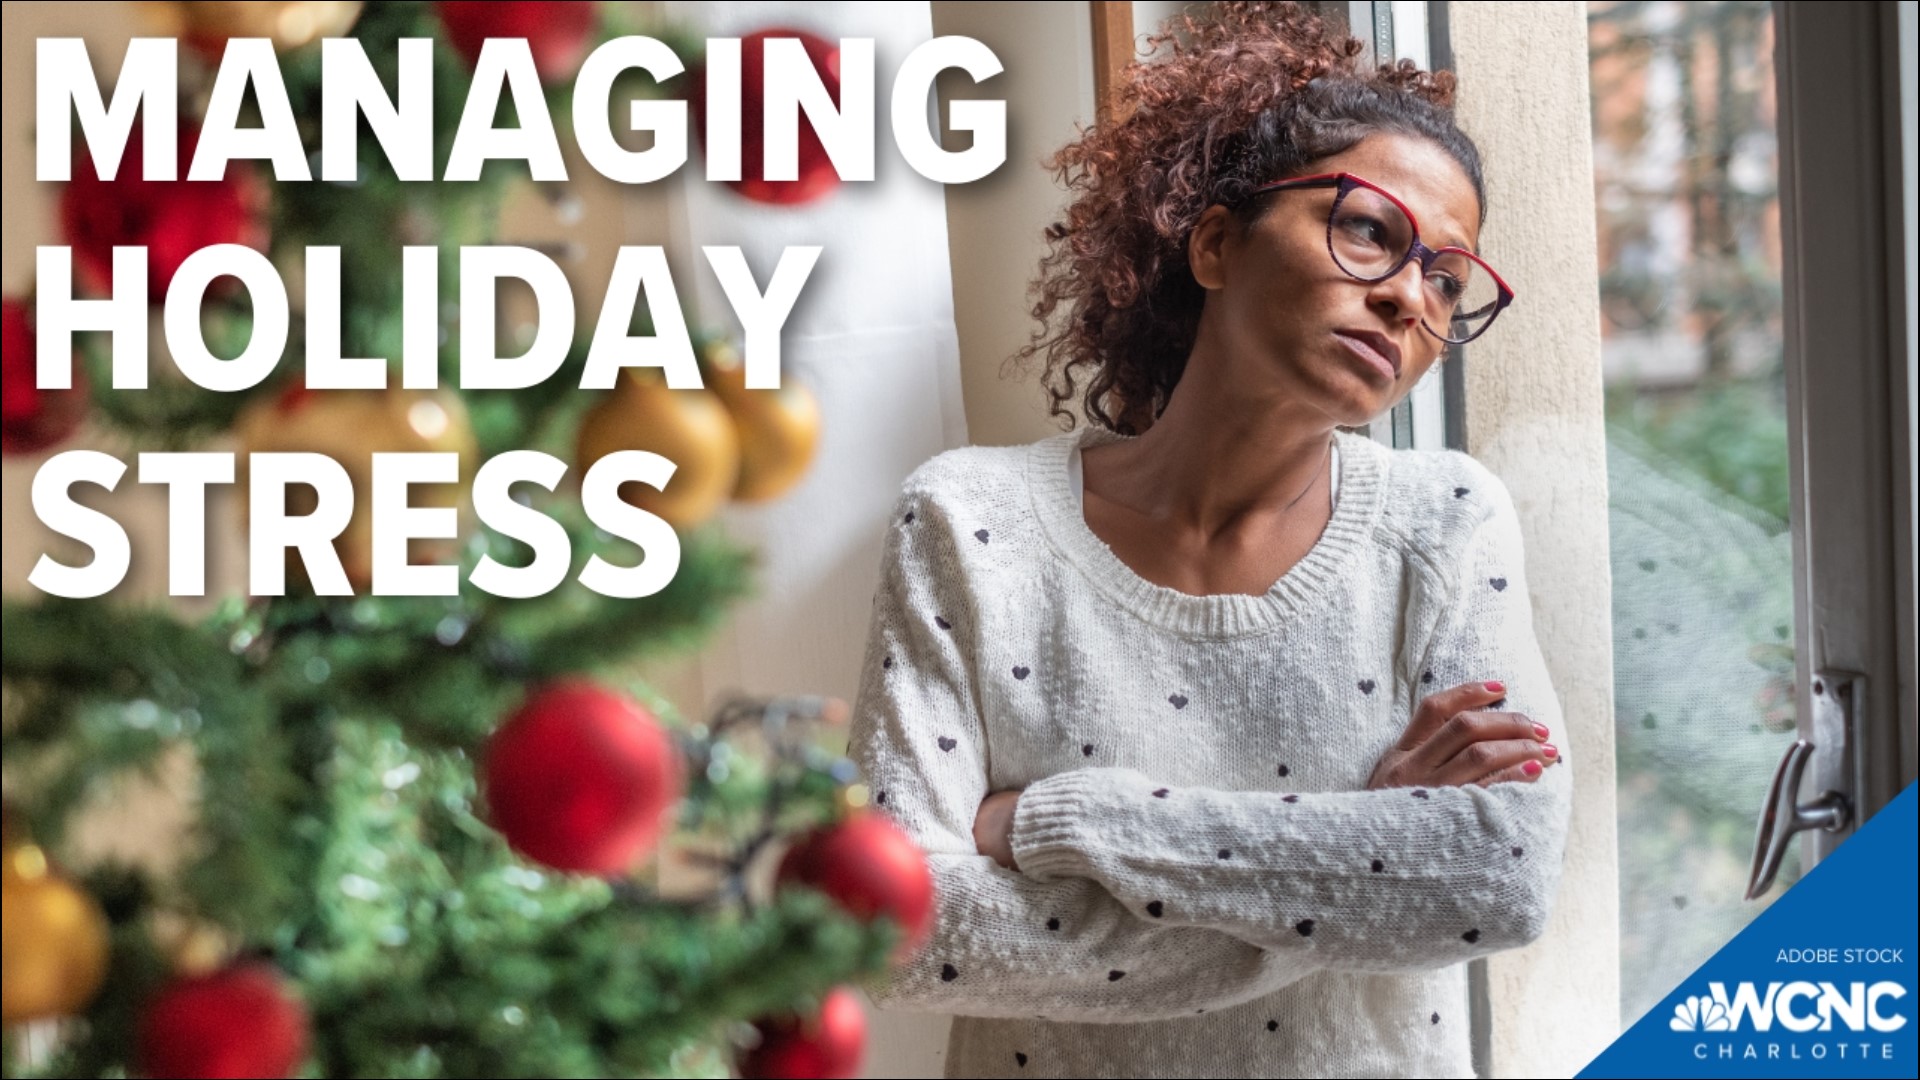 Are holidays stressing you out? Here are some tips for managing your stress during the holiday season.